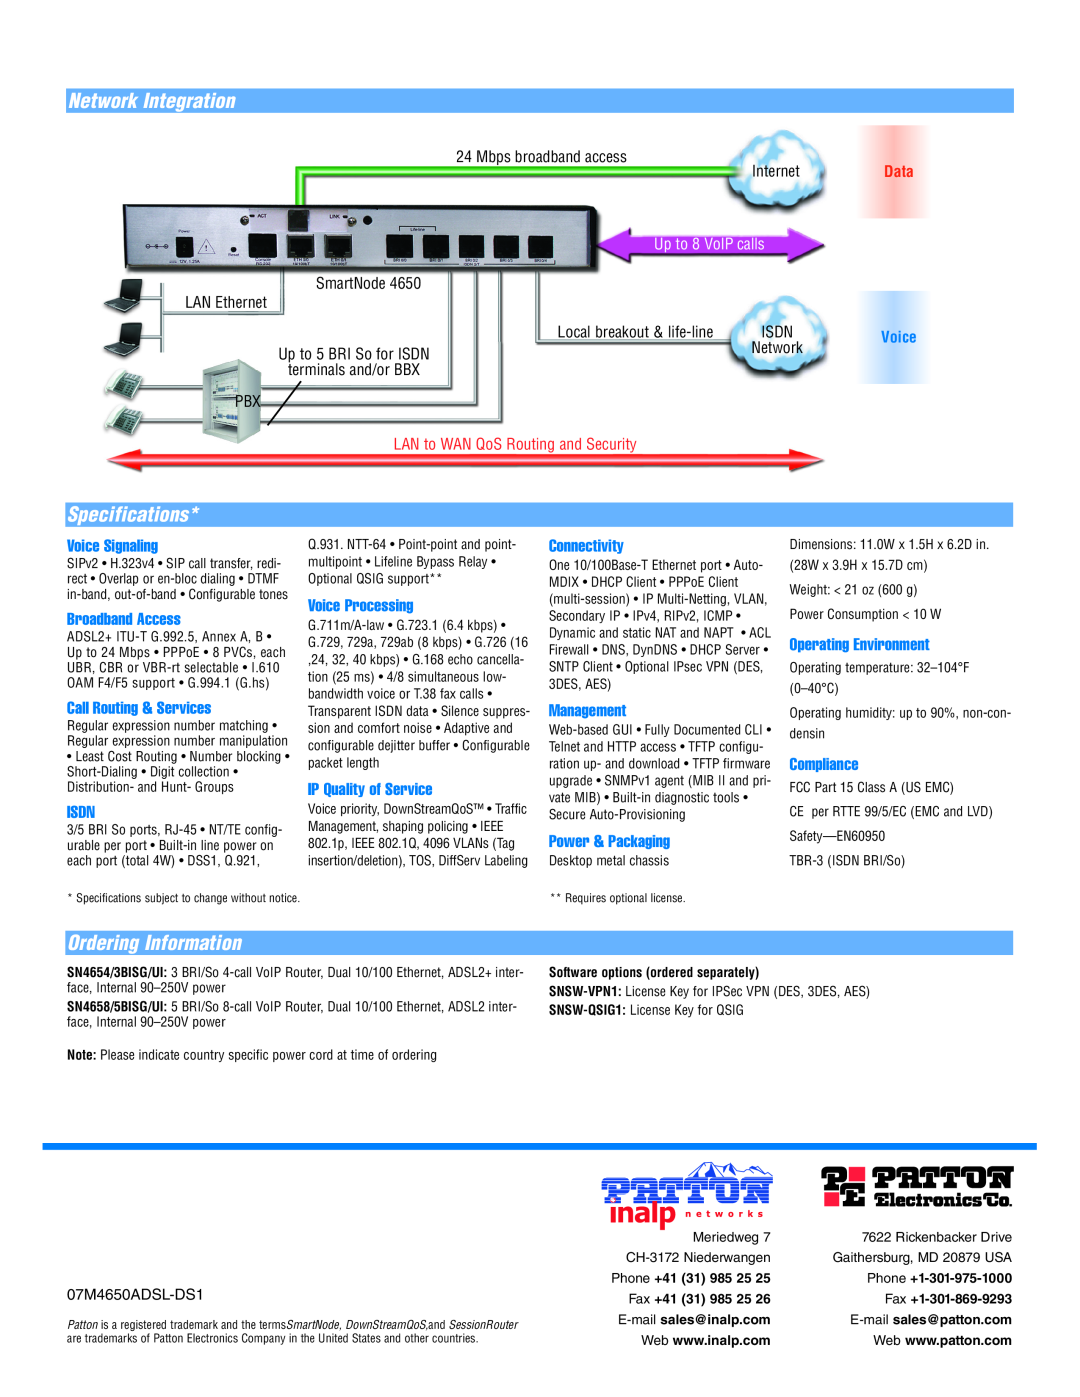 Patton electronic 4650 manual Network Integration, Specifications, Ordering Information 